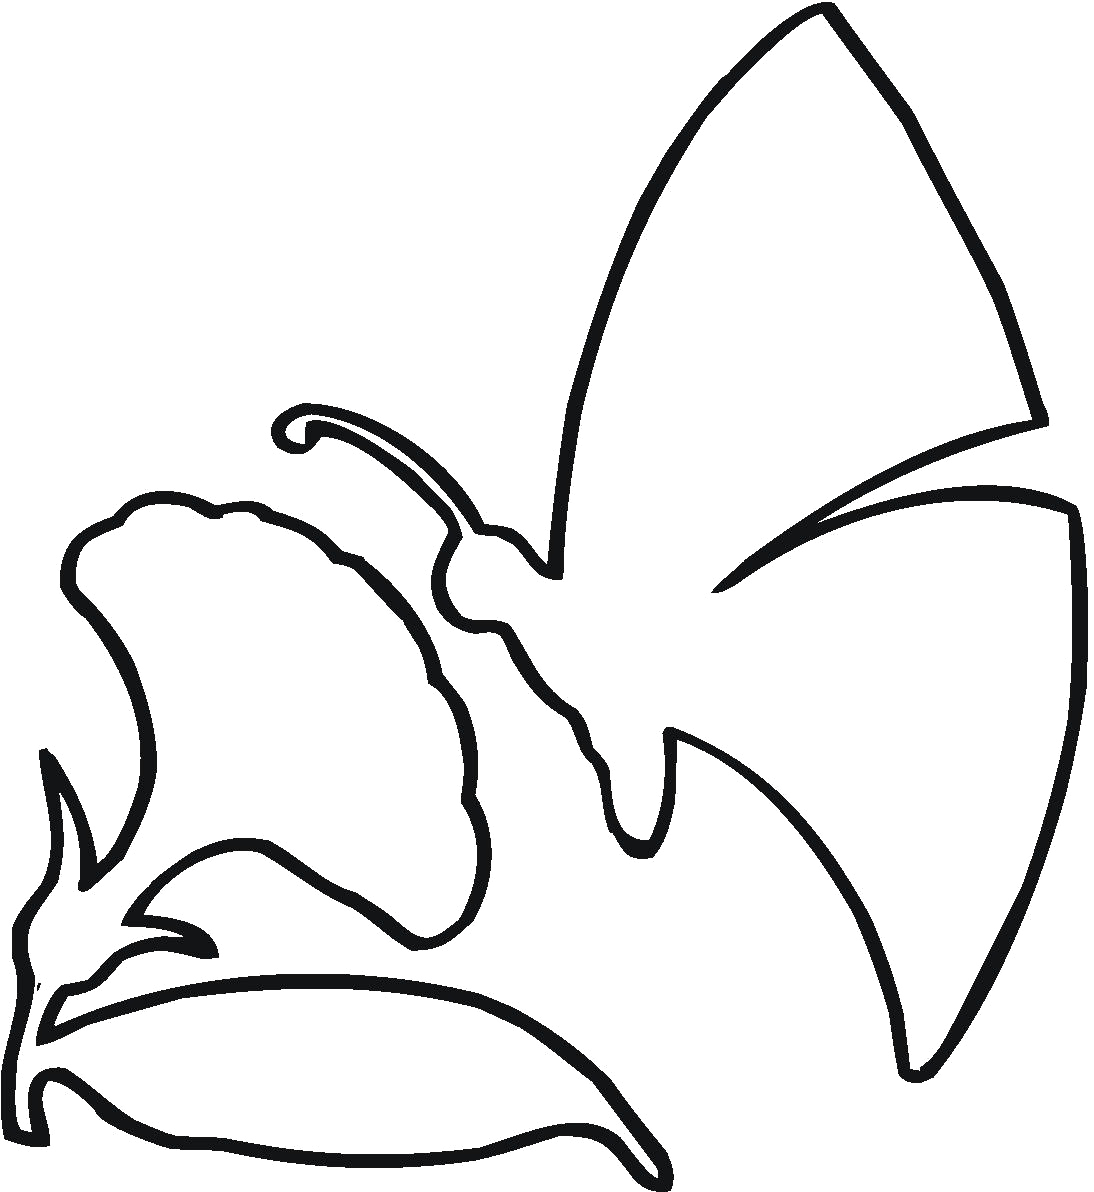 Butterfly outline clipart.